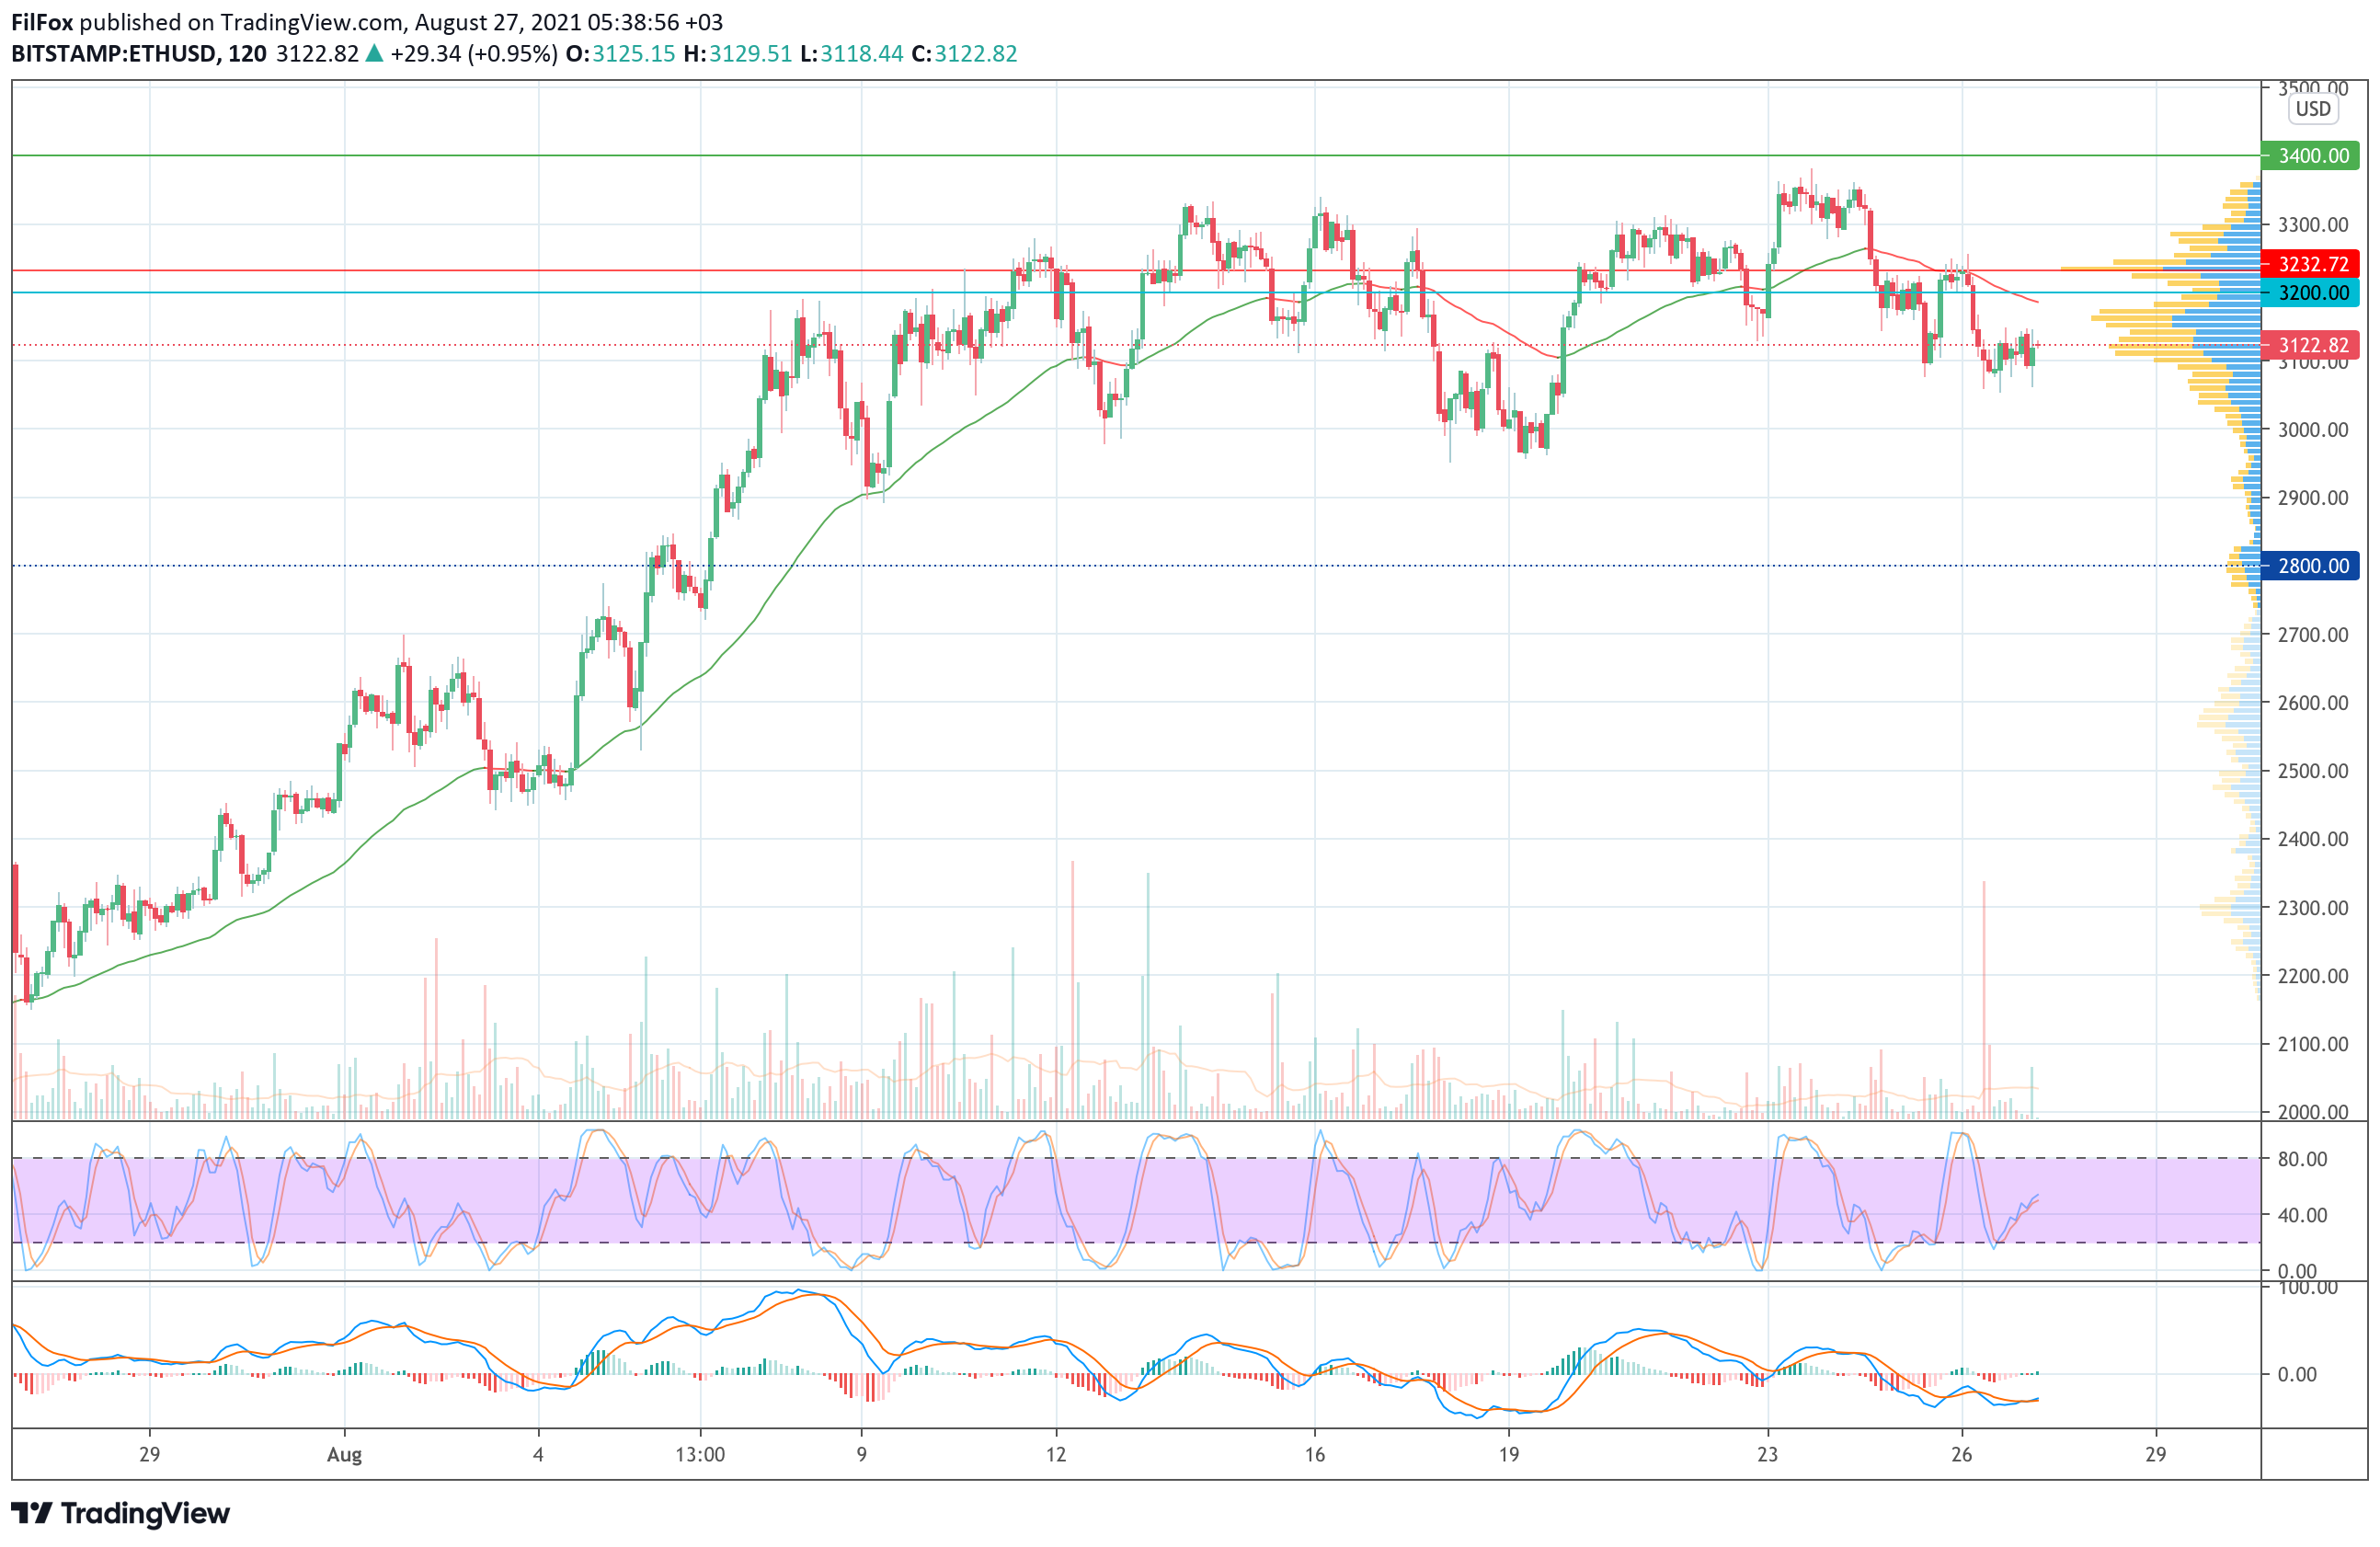 Analysis of the prices of Bitcoin, Ethereum, XRP for 08/27/2021